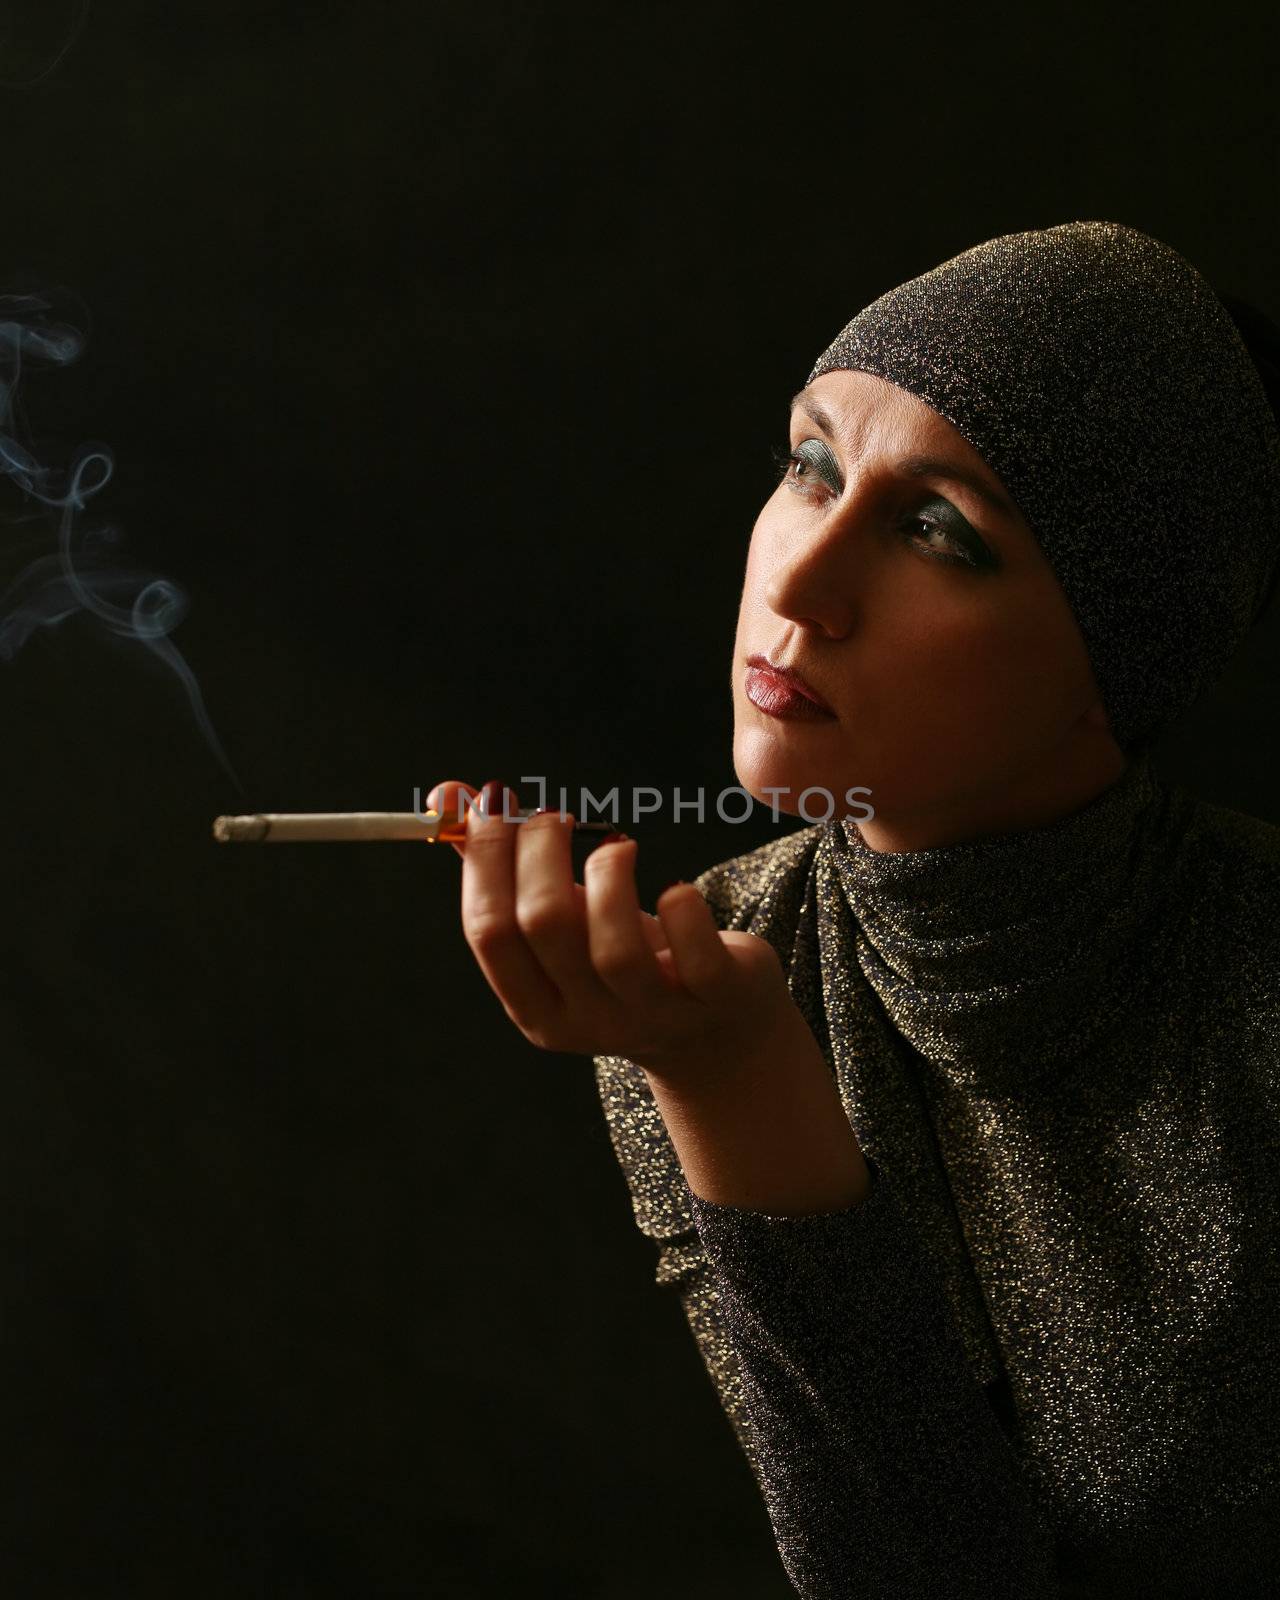 Lady with a cigarette on black background